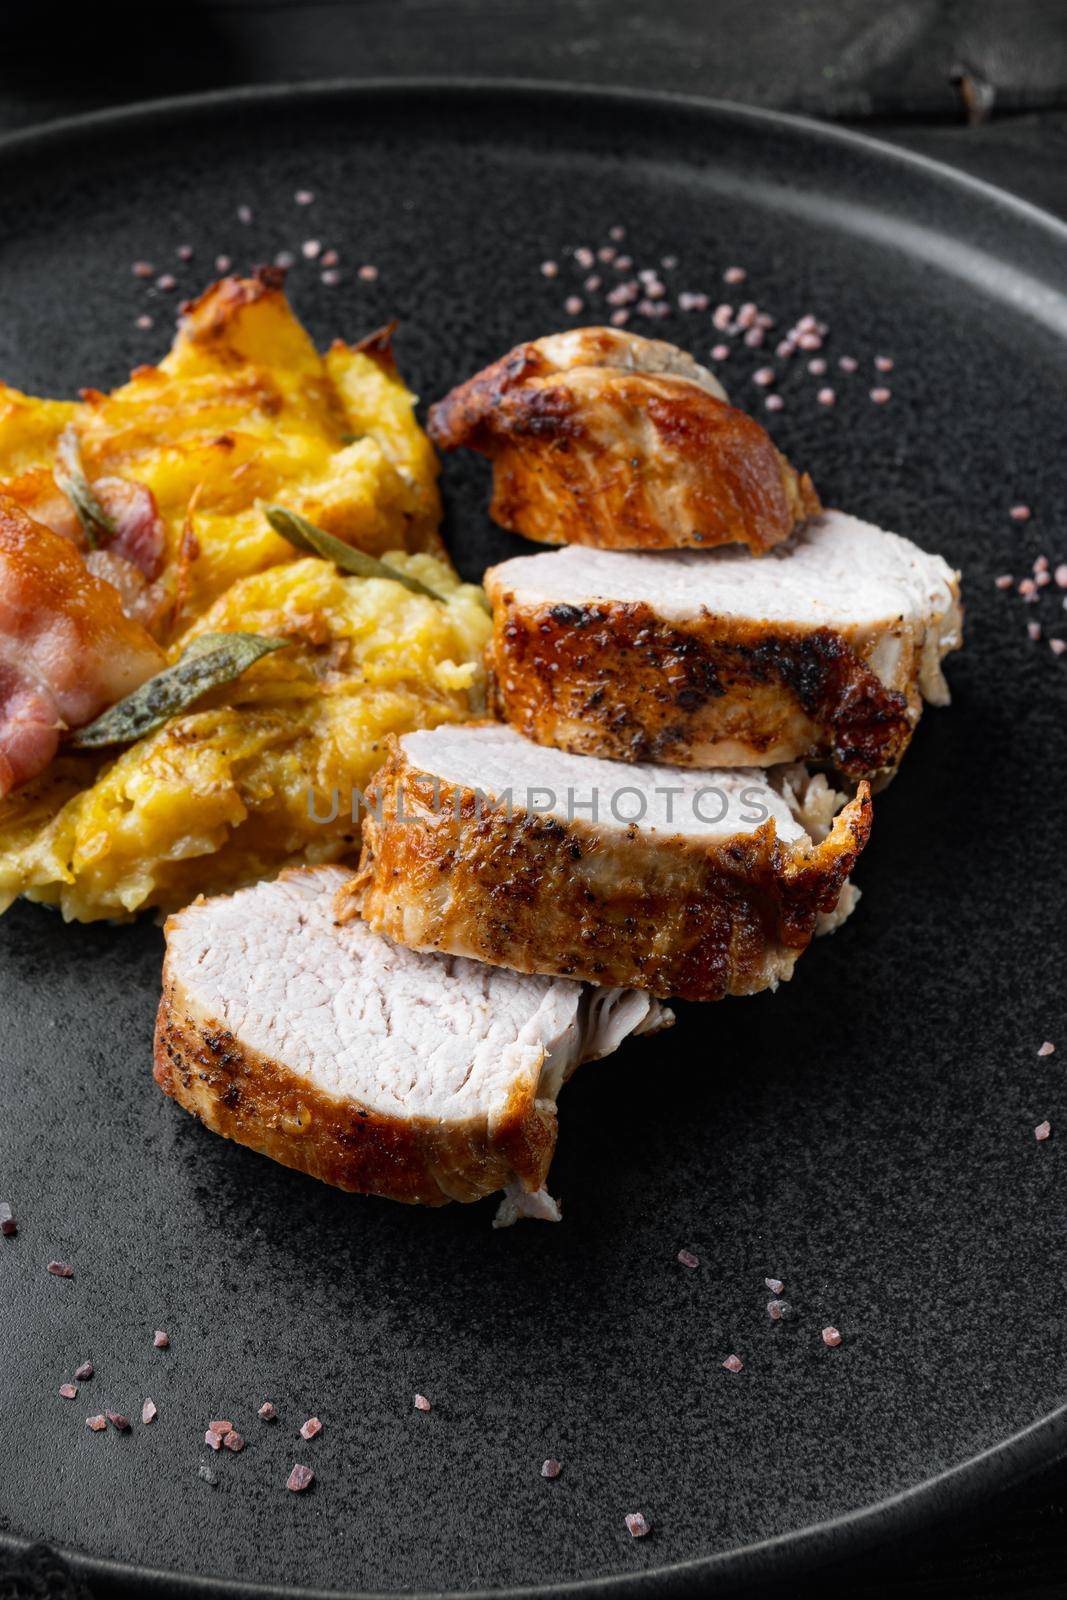 Roasted pork loin with mash potatoe gratin, sage and prosciutto, on plate dish, on black wooden table background by Ilianesolenyi